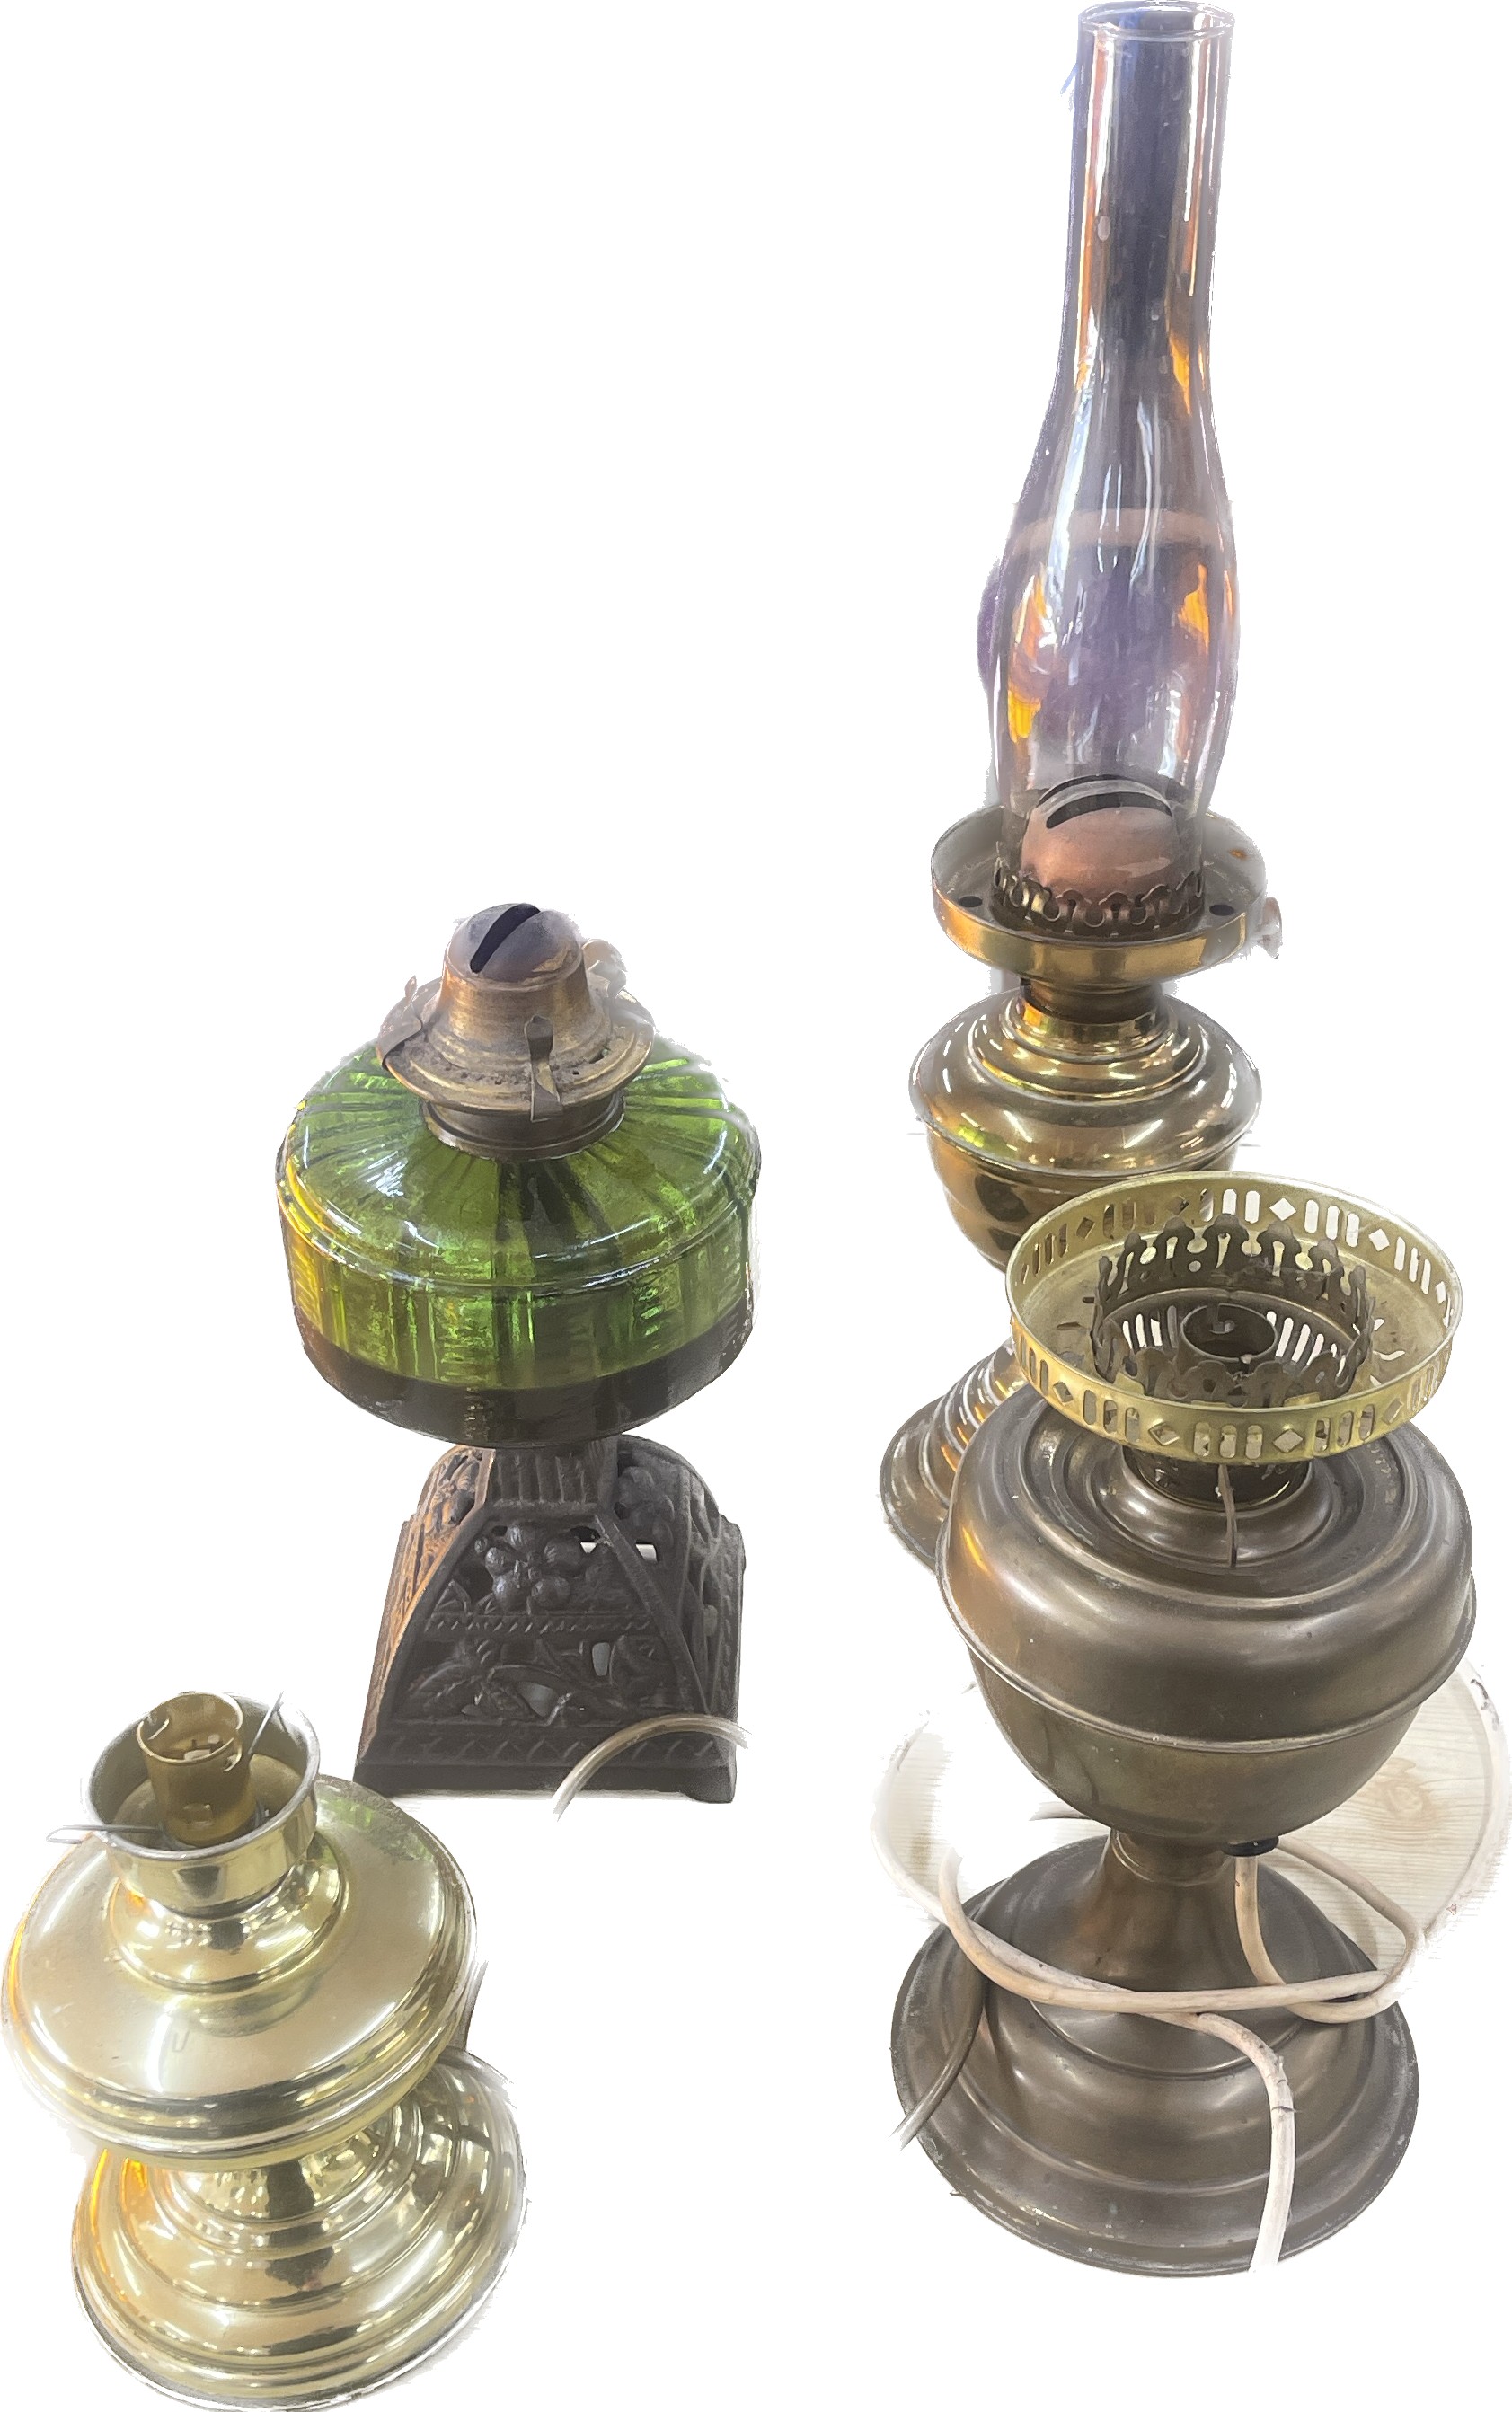 Selection of 4 vintage oil lamps, spares and repairs